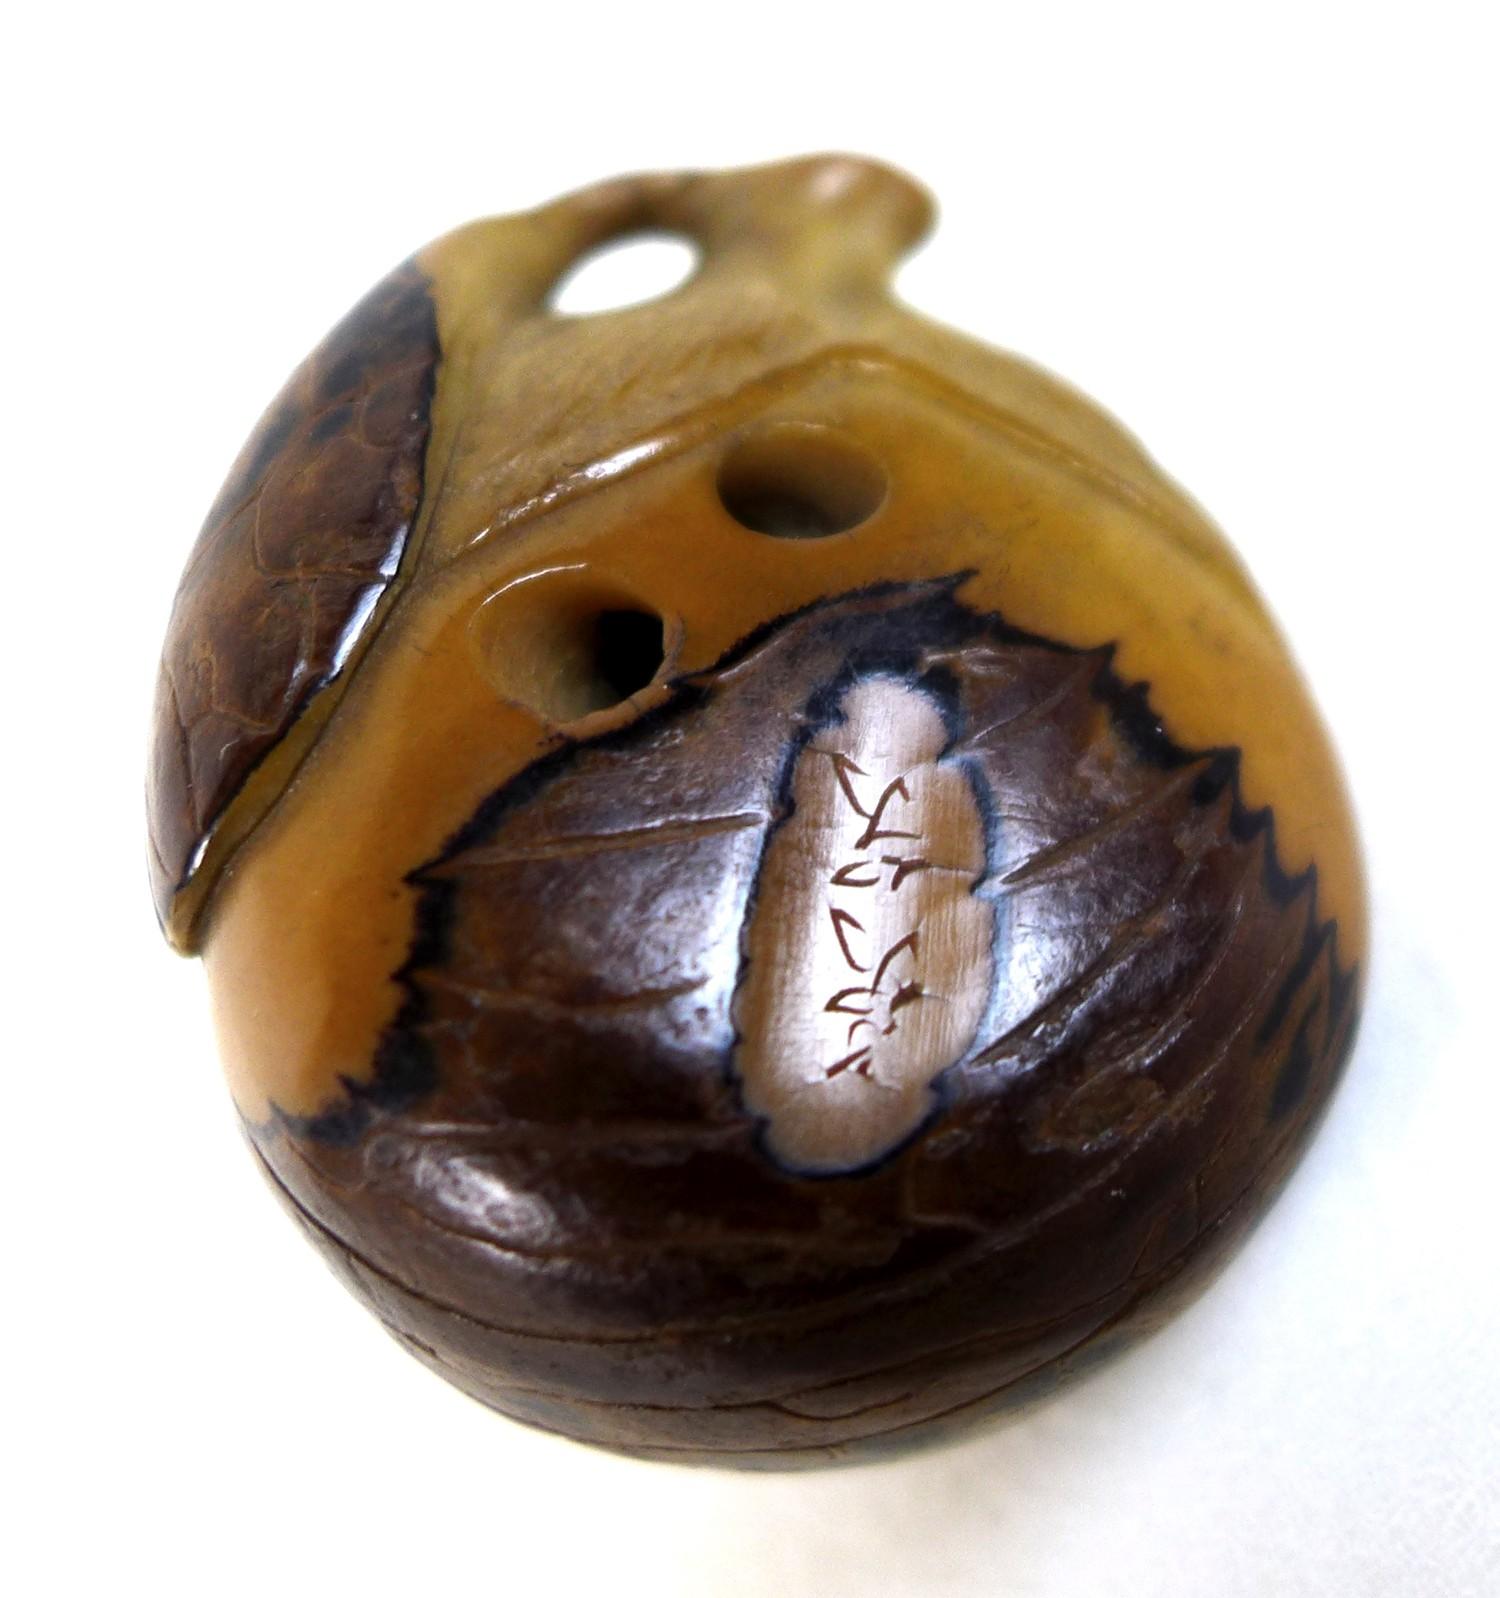 A Japanese Katabori netsuke, likely Meiji period, made out of a tagua nut and shell and carved in - Image 7 of 7